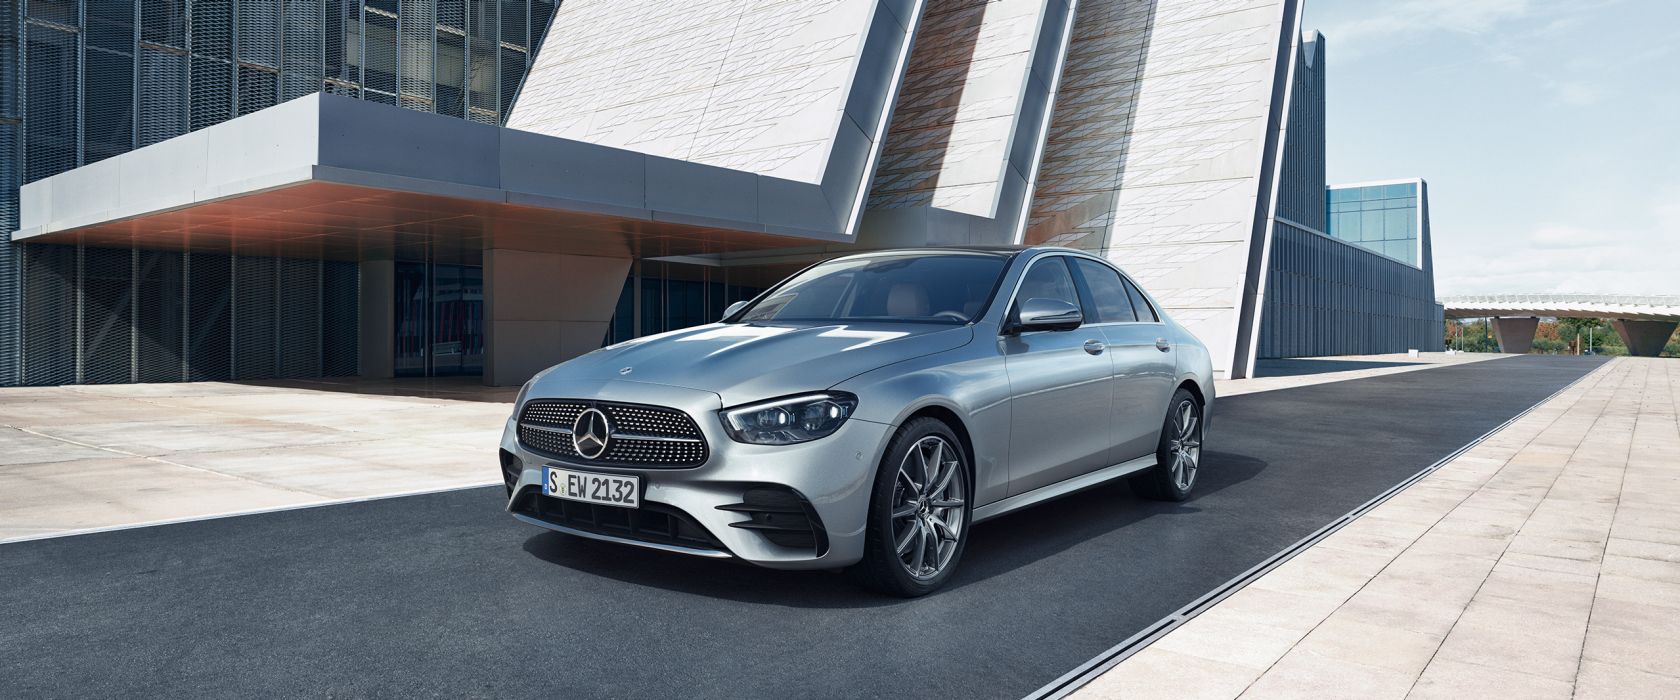 What you need to known about leasing a Mercedes